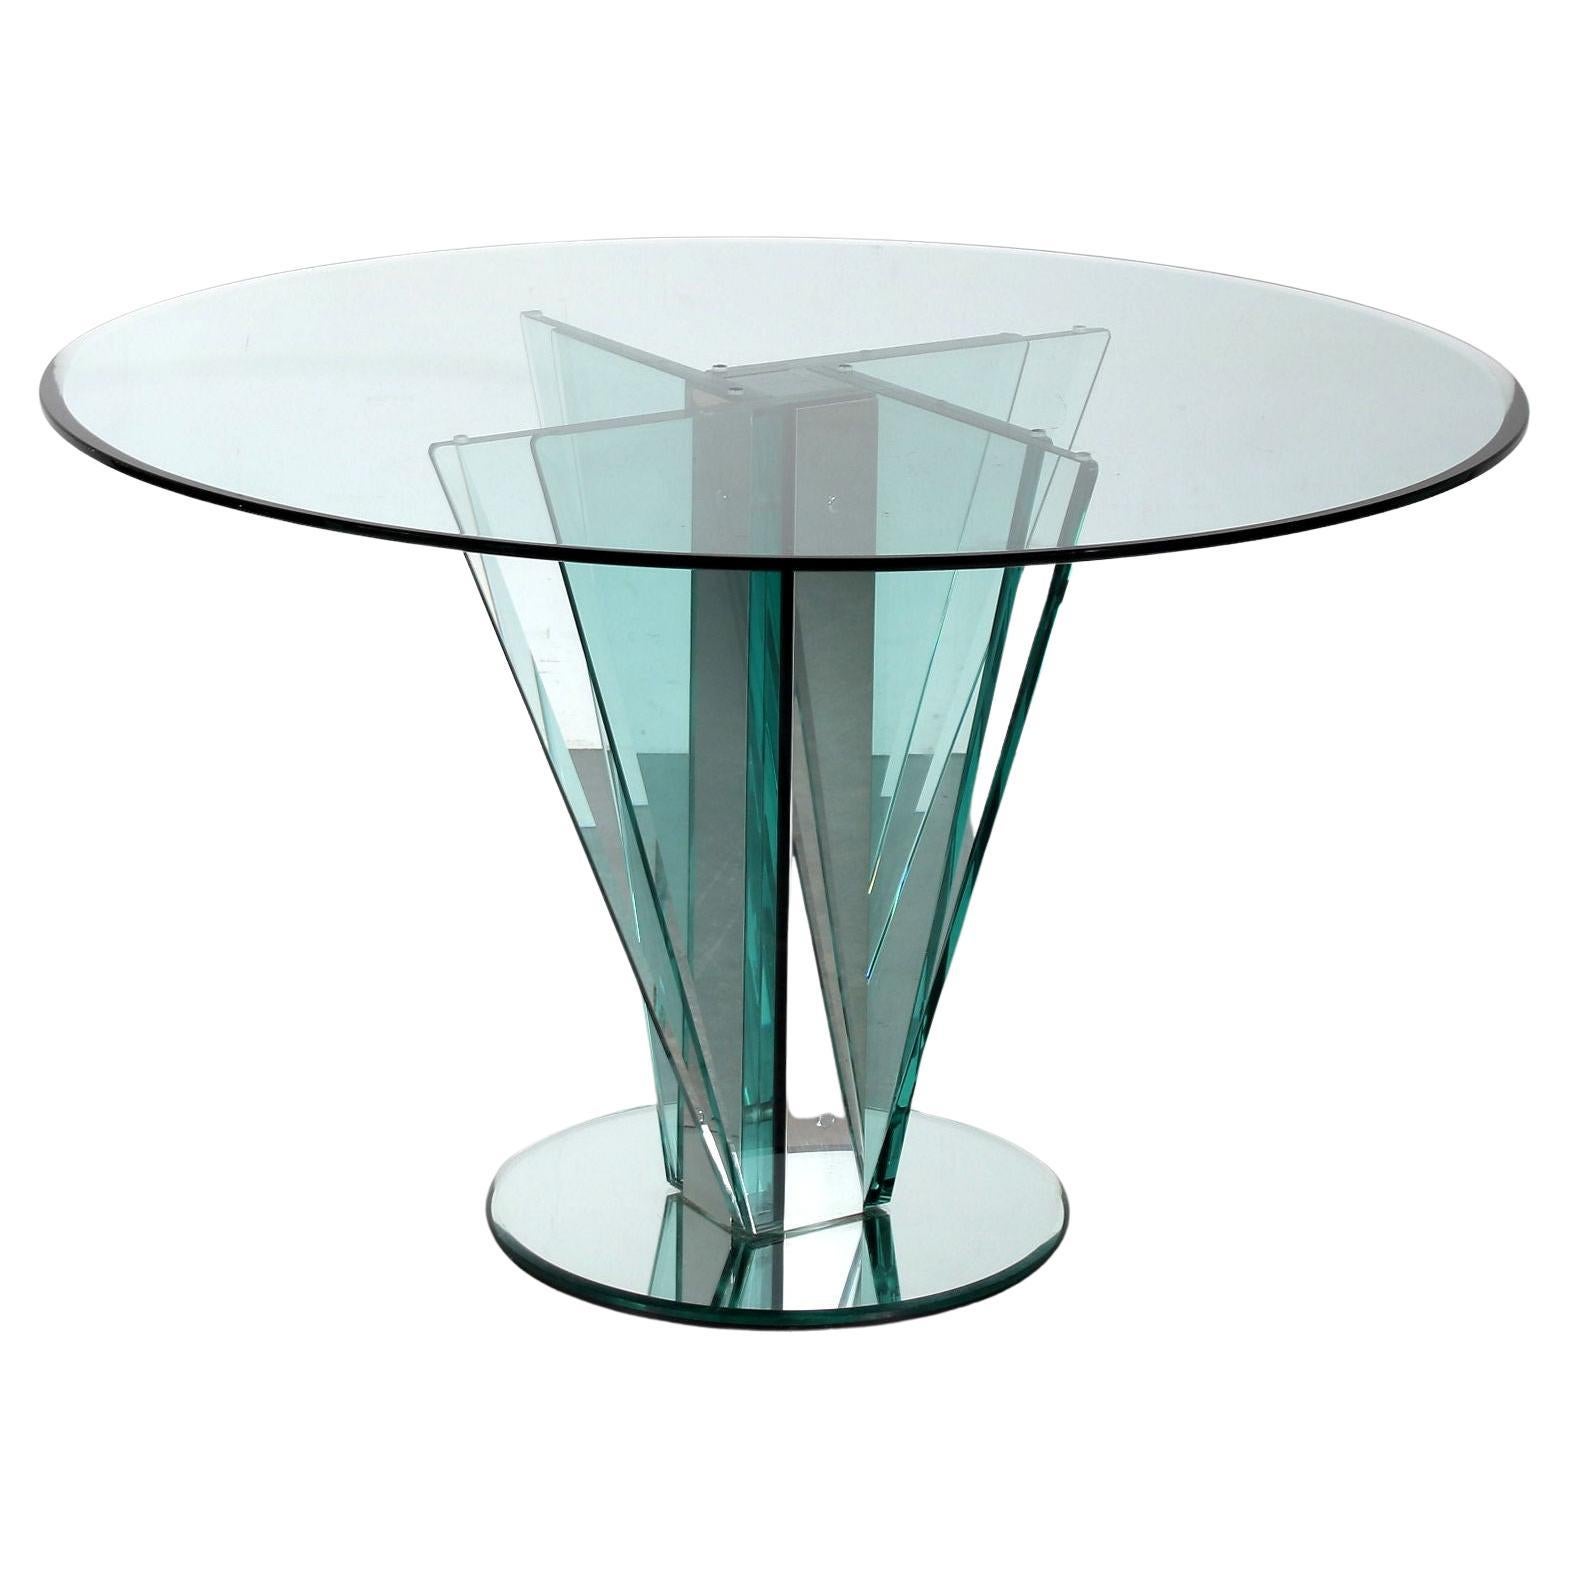 Nile Glass Table attributed to Pietro Chiesa for Fontana Arte, Italy 1970